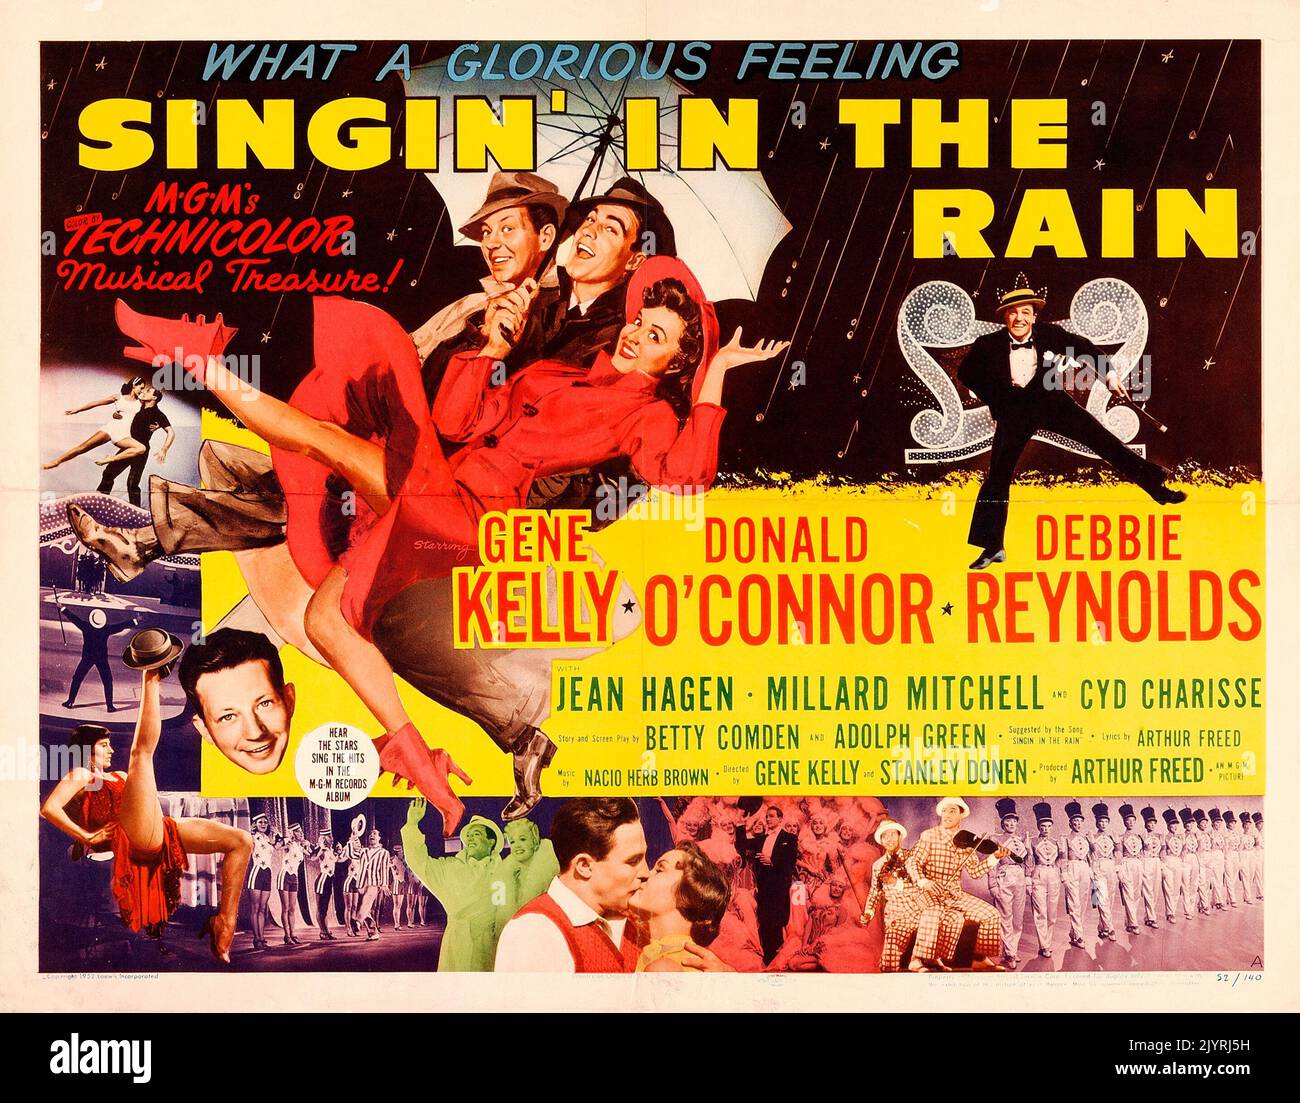 Vintage movie poster - Singin' in the Rain (MGM, 1952). Half Sheet film poster, Style A - Musical feat Gene Kelly Donald O'Connor Debbie Reynolds Stock Photo